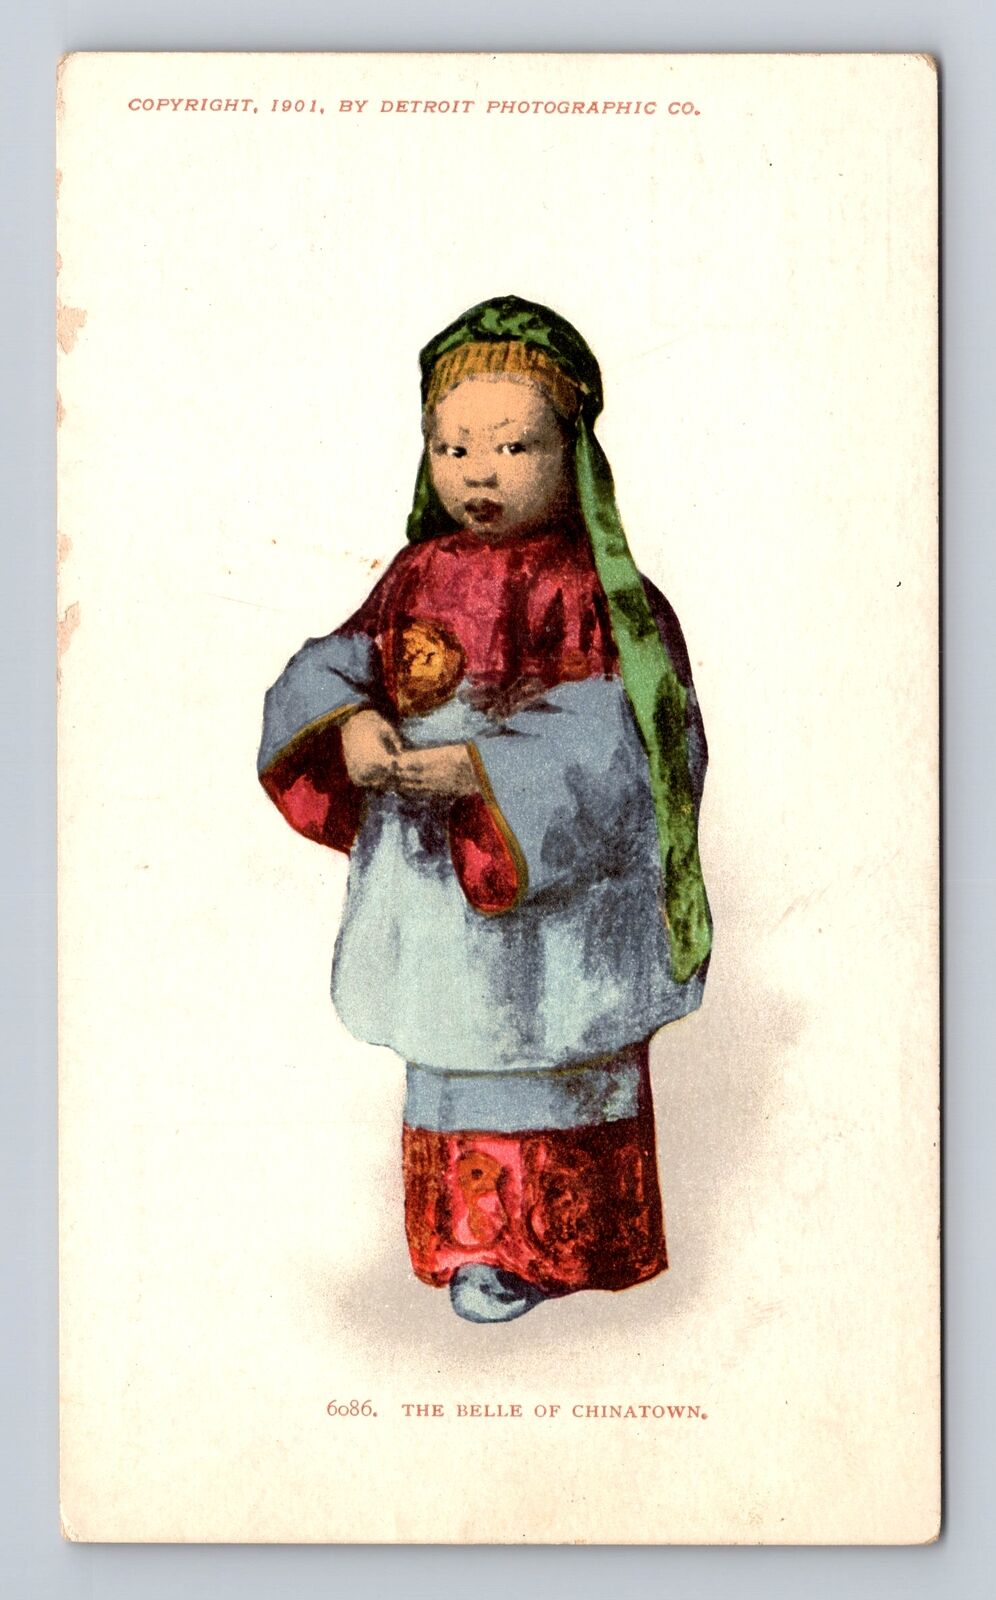 The Belle of Chinatown, Child in Traditional Dress-Detroit Pub. Vintage Postcard